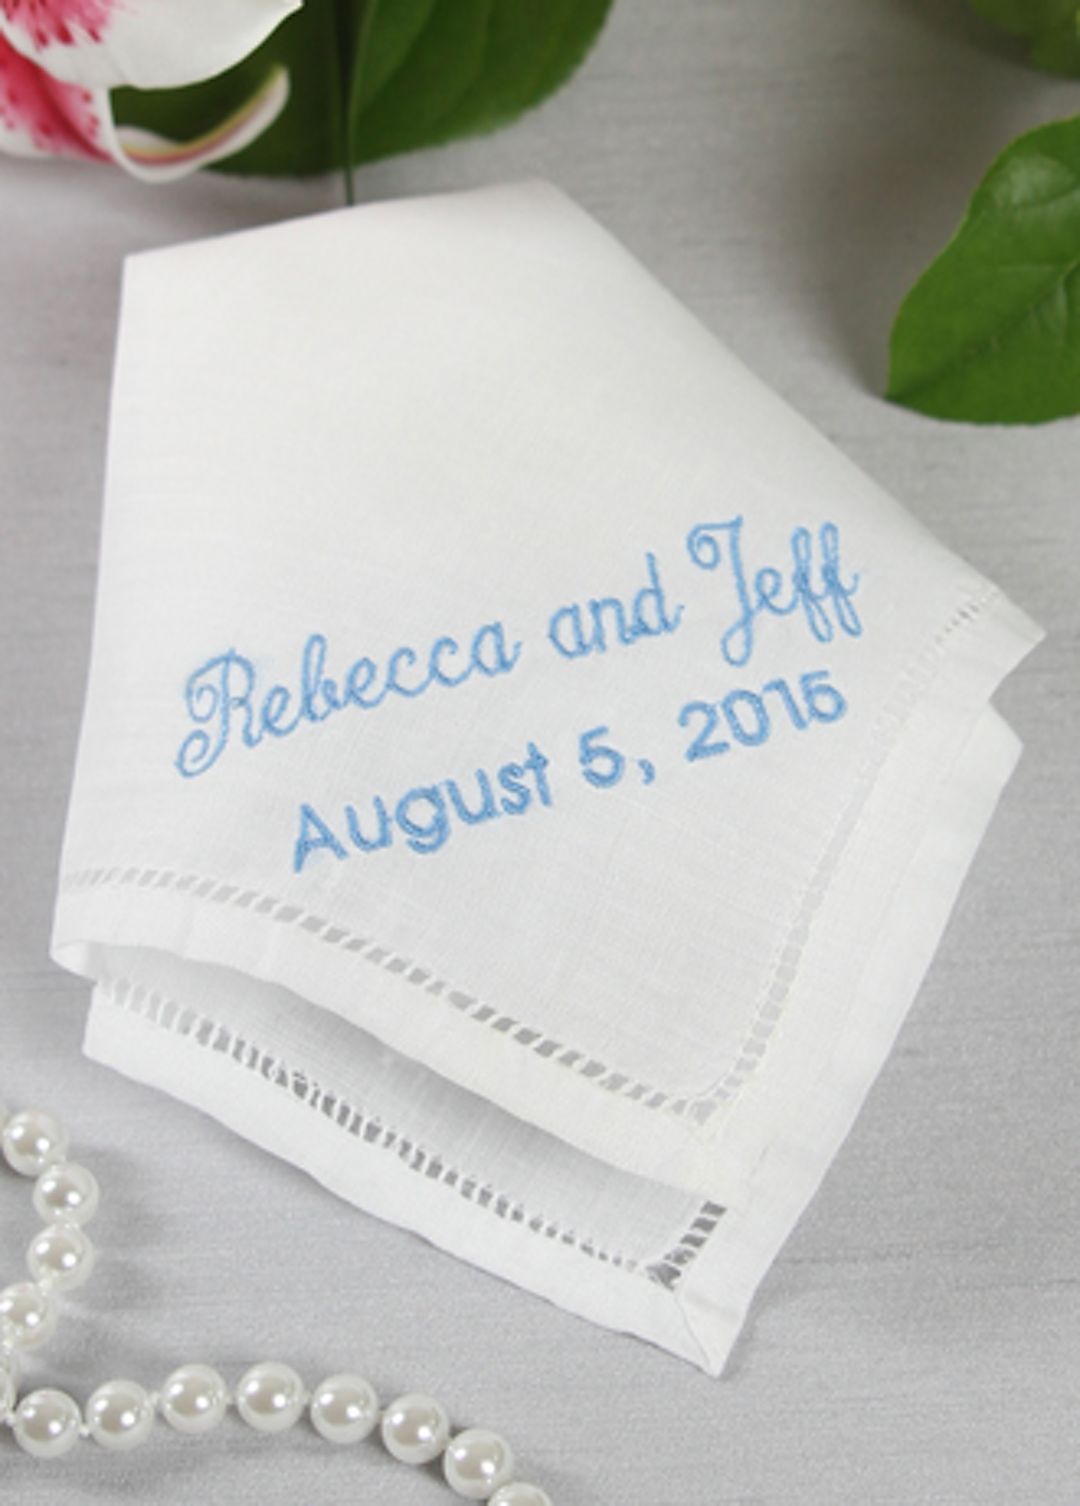 Exclusive Personalized Handkerchief Names and Date Image 2